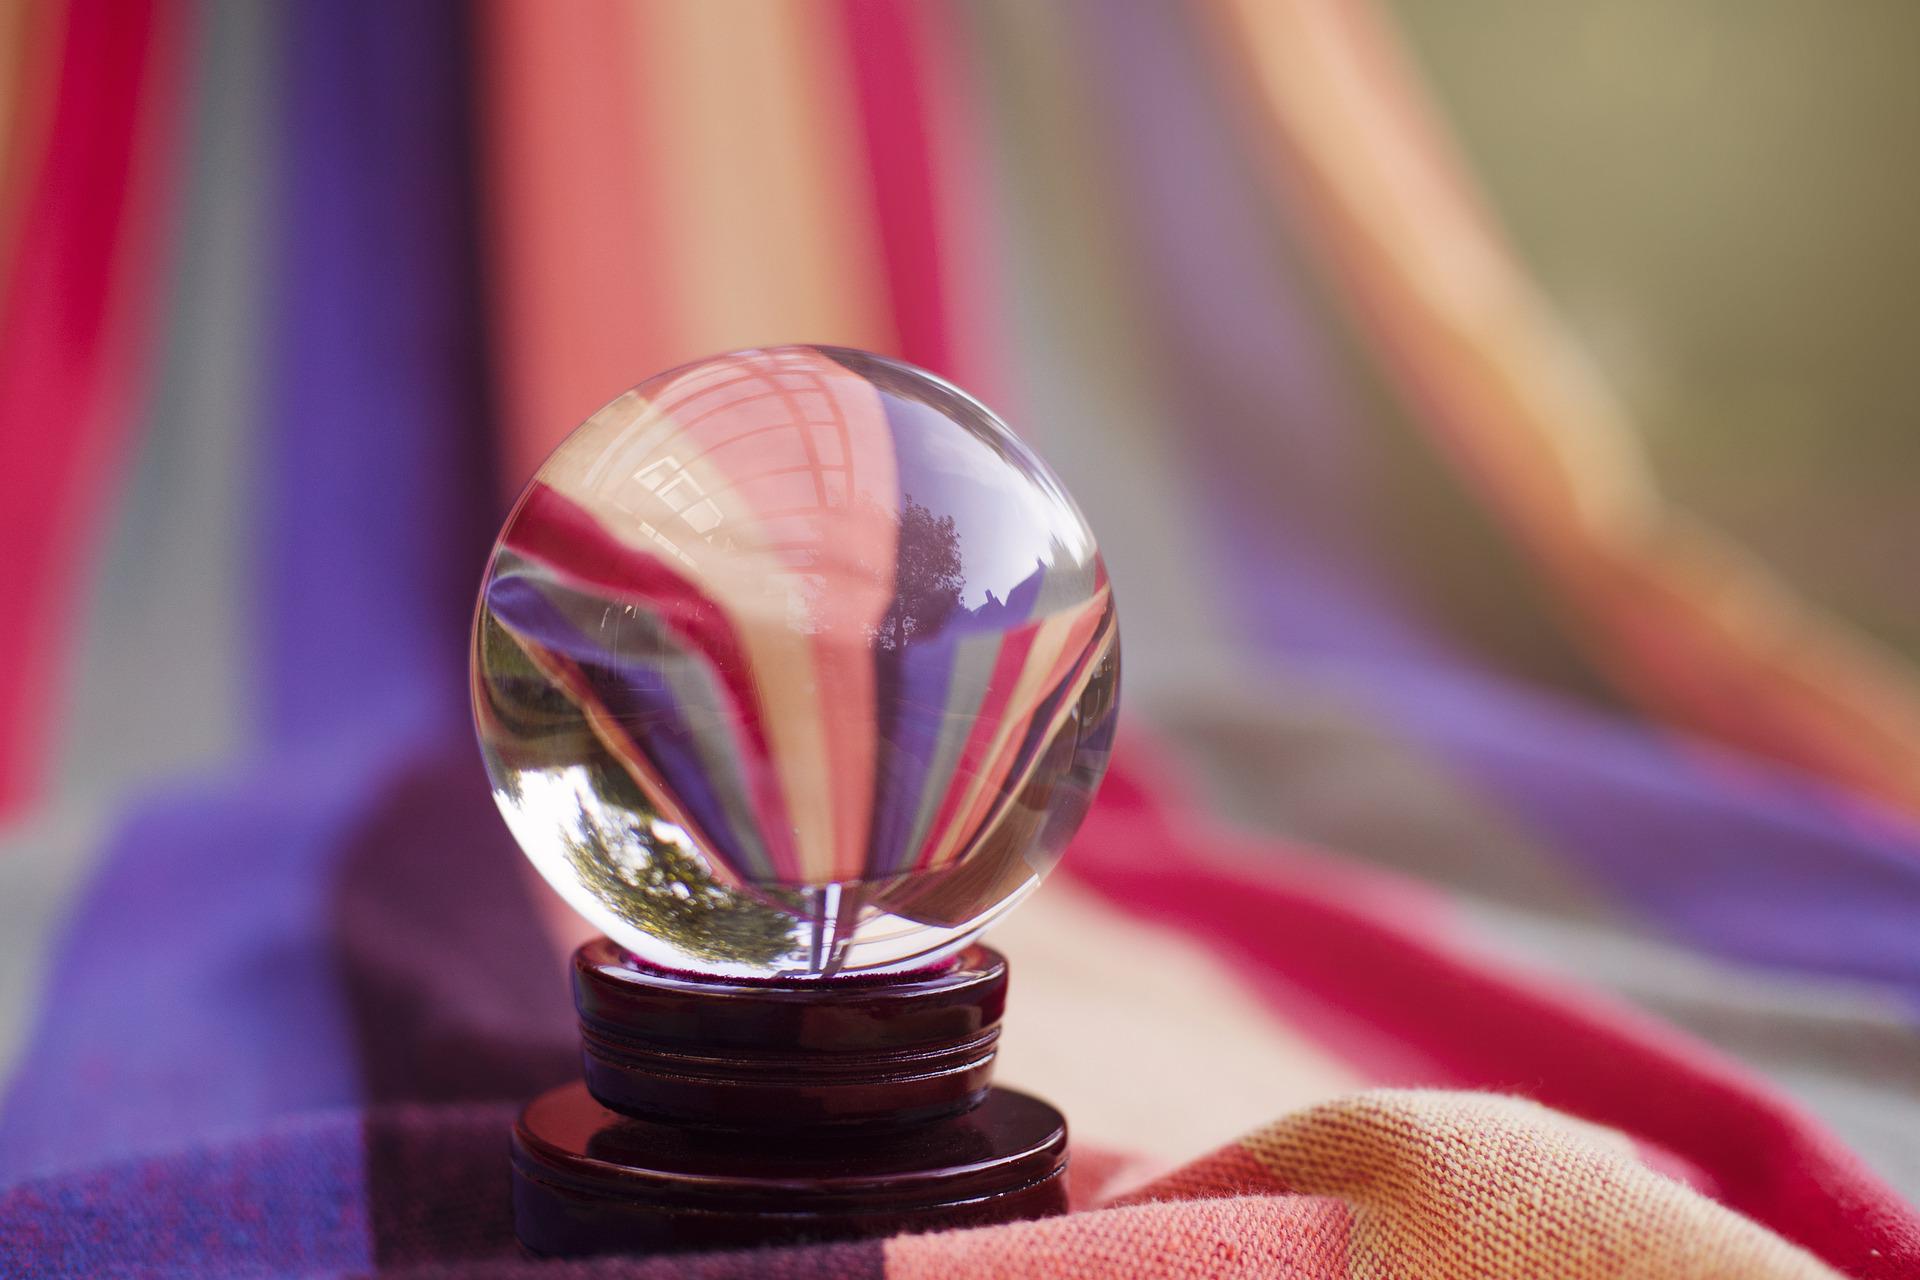 Fortune Teller Online: Benefits, Tips + Where To Find One